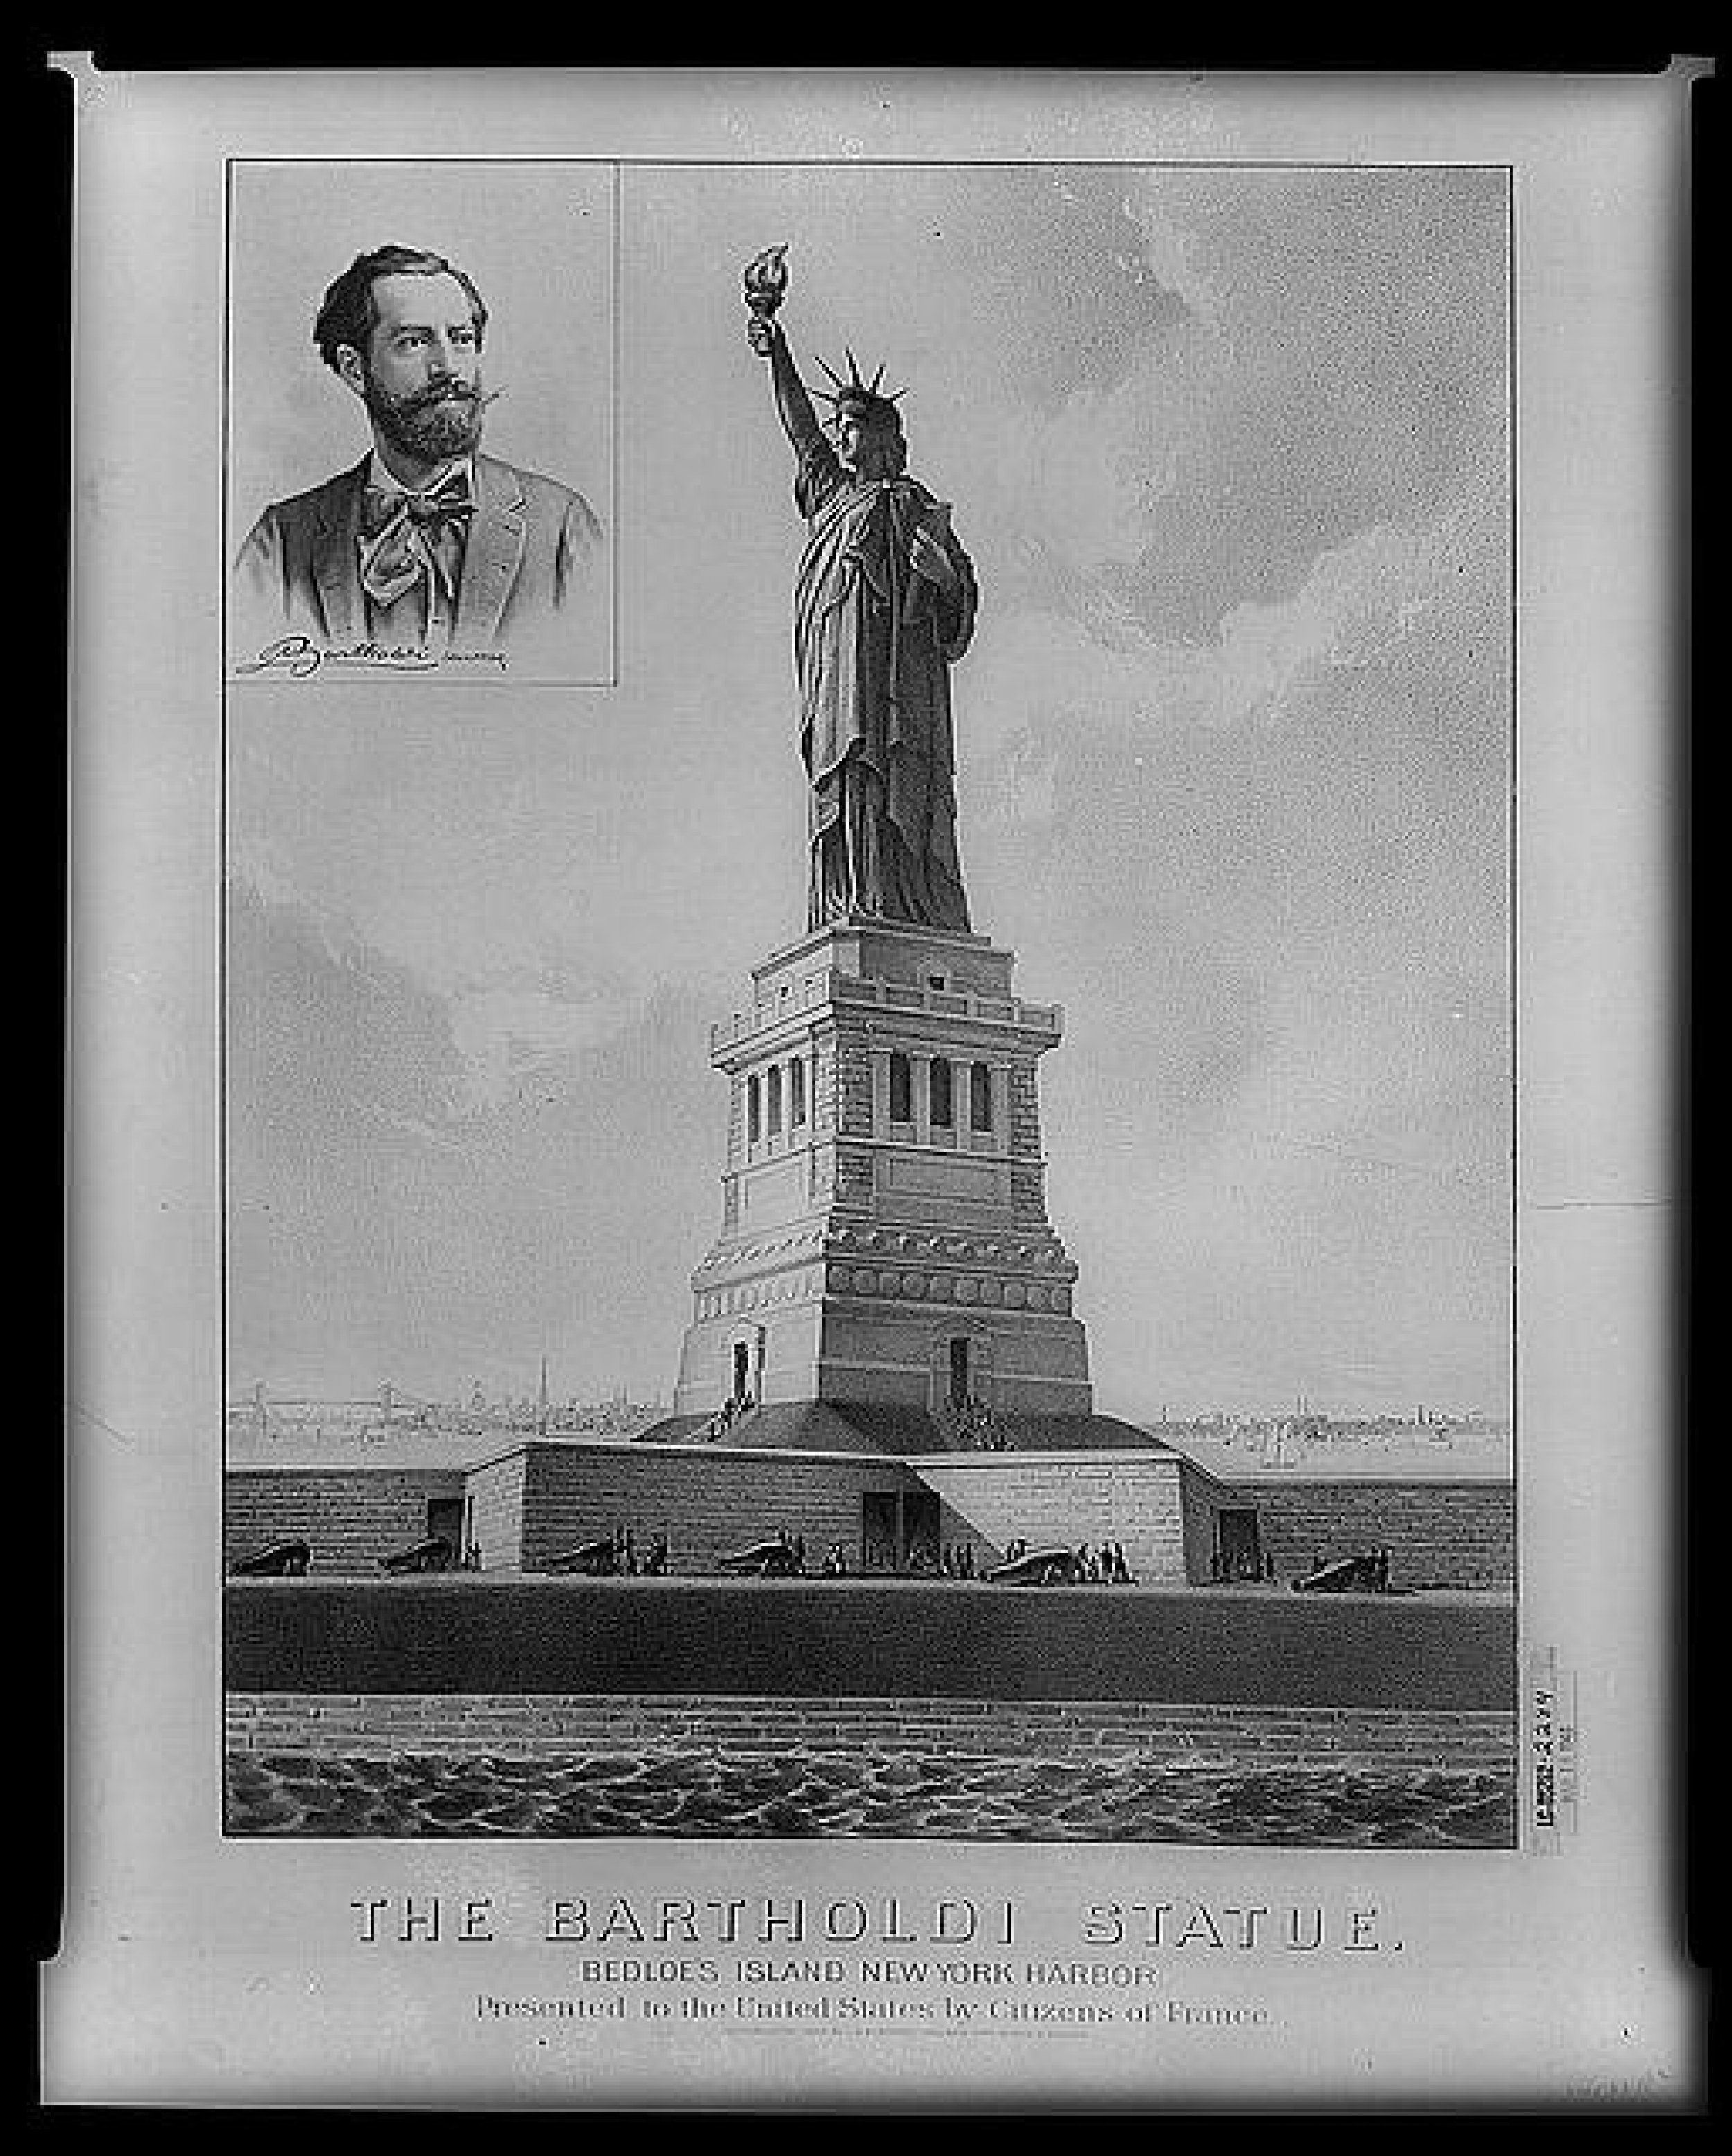 The Bartholdi Statue--Bedloes Island, New York Harbor--Presented to the United States by citizens of France